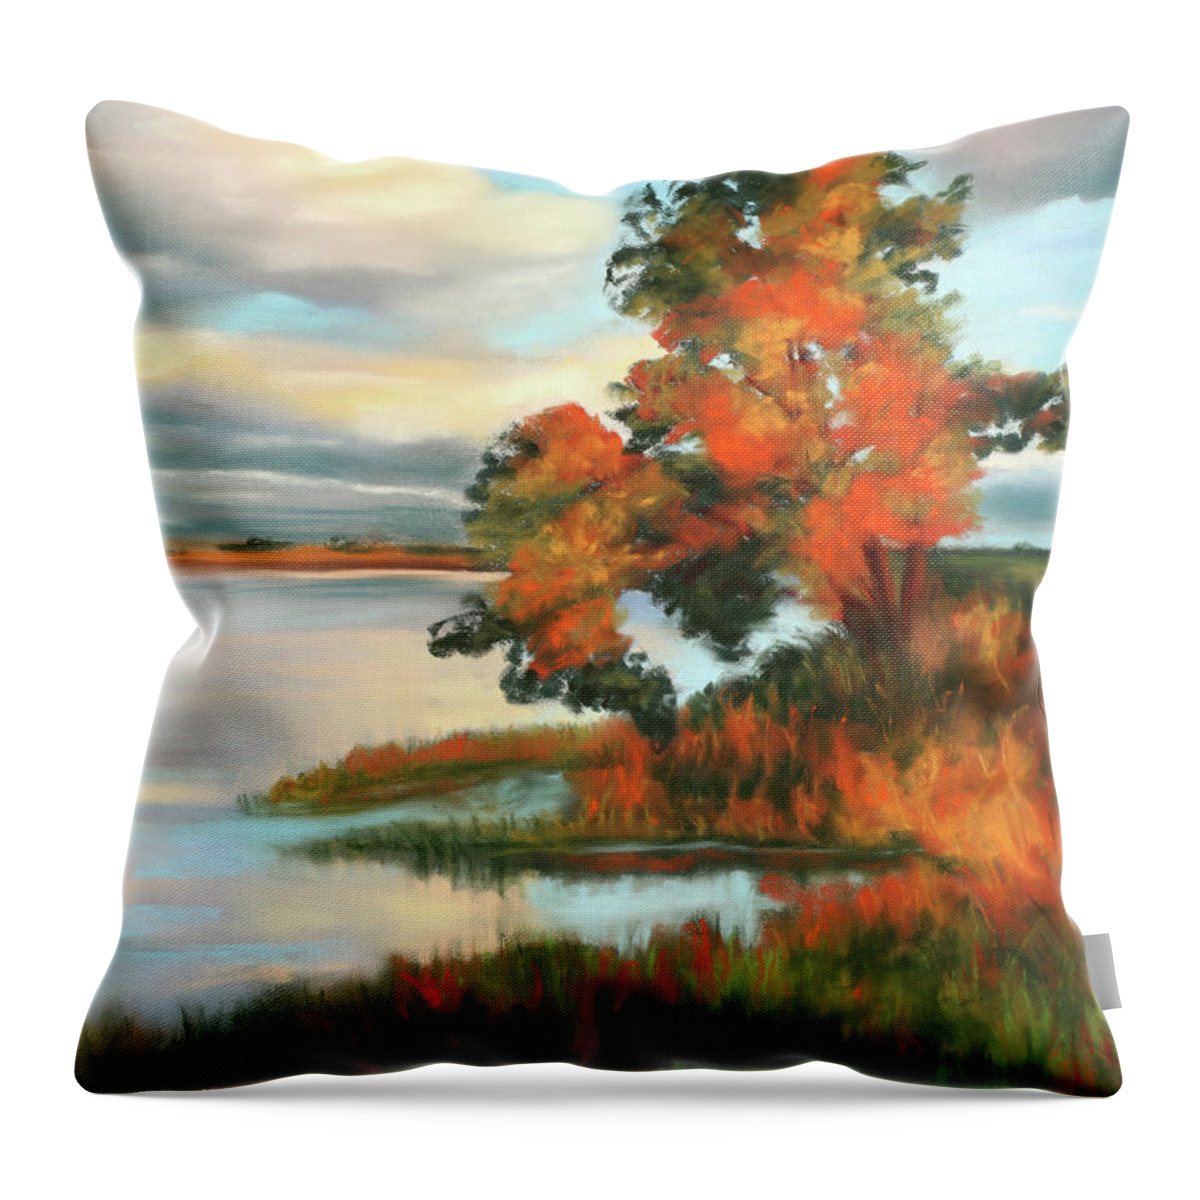 Marsh Throw Pillow featuring the painting Home by the Water by Sandi Snead